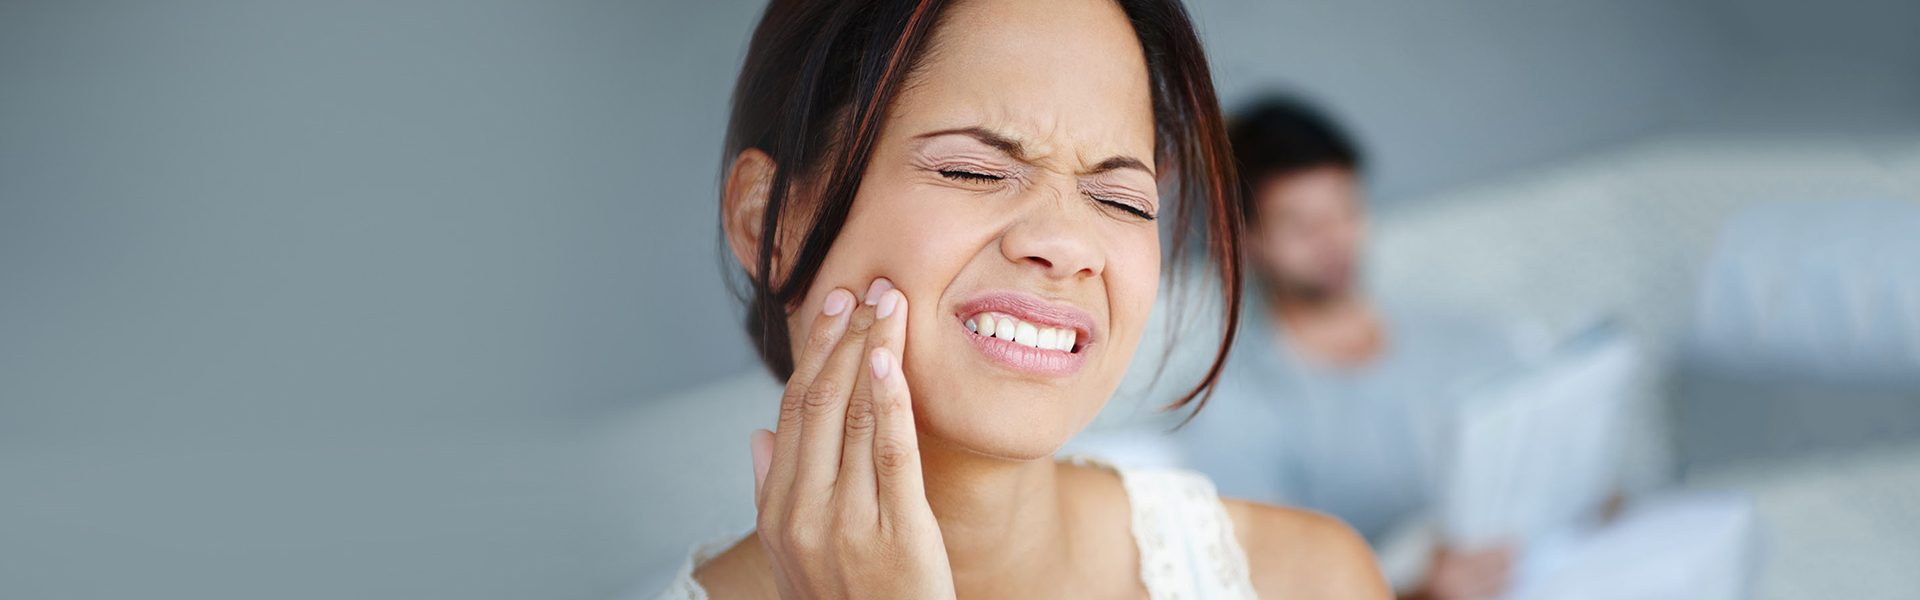 3 Things You Should Know About Teeth Grinding